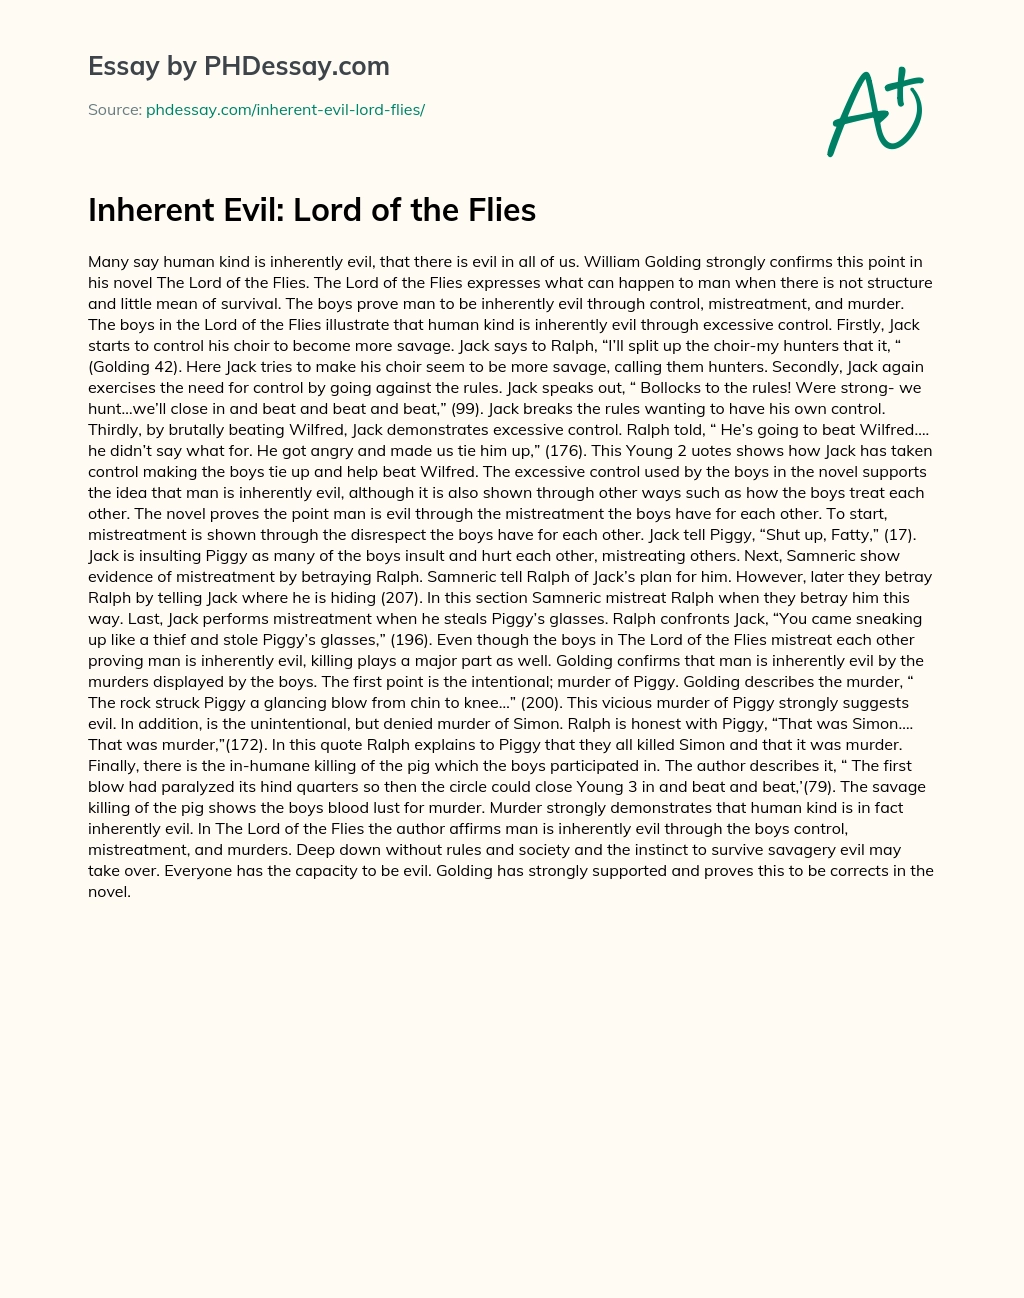 Inherent Evil: Lord of the Flies essay